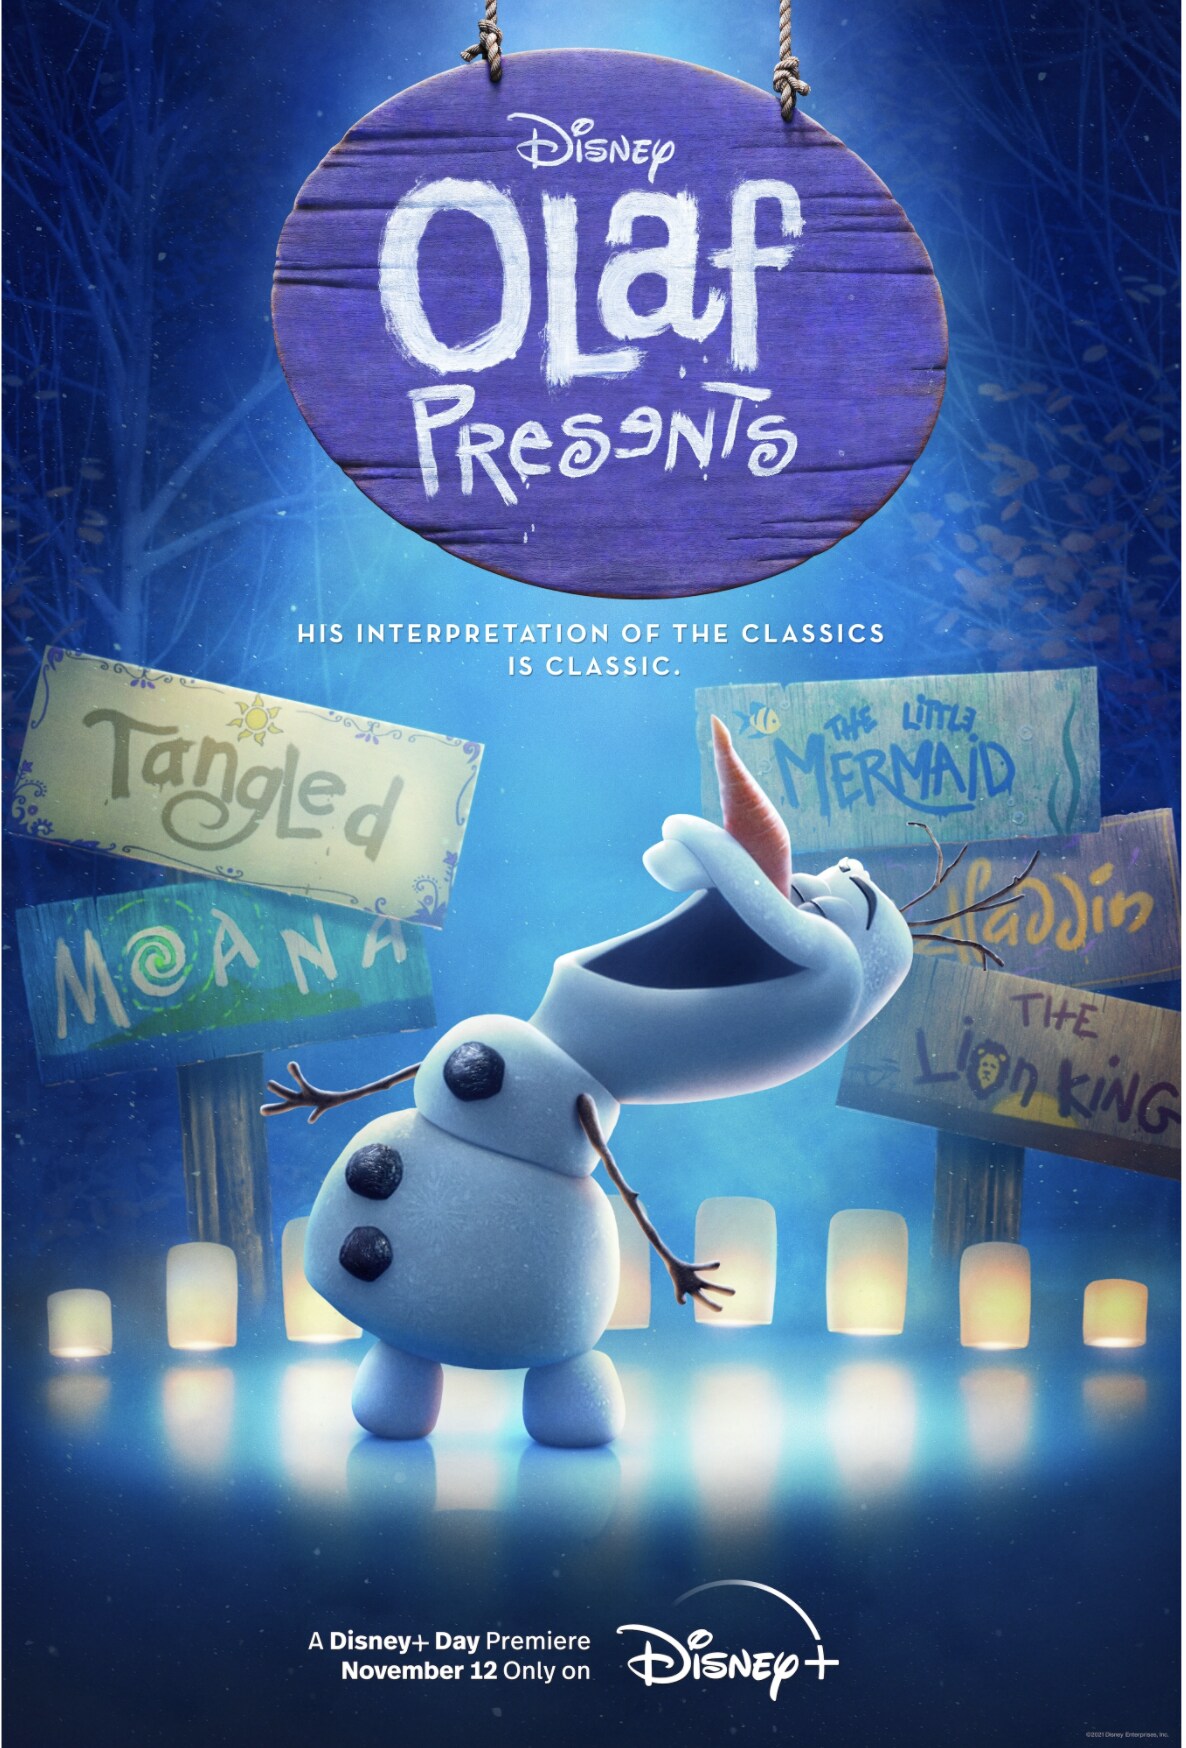 Olaf appears in lights in his new short, Olaf Presents